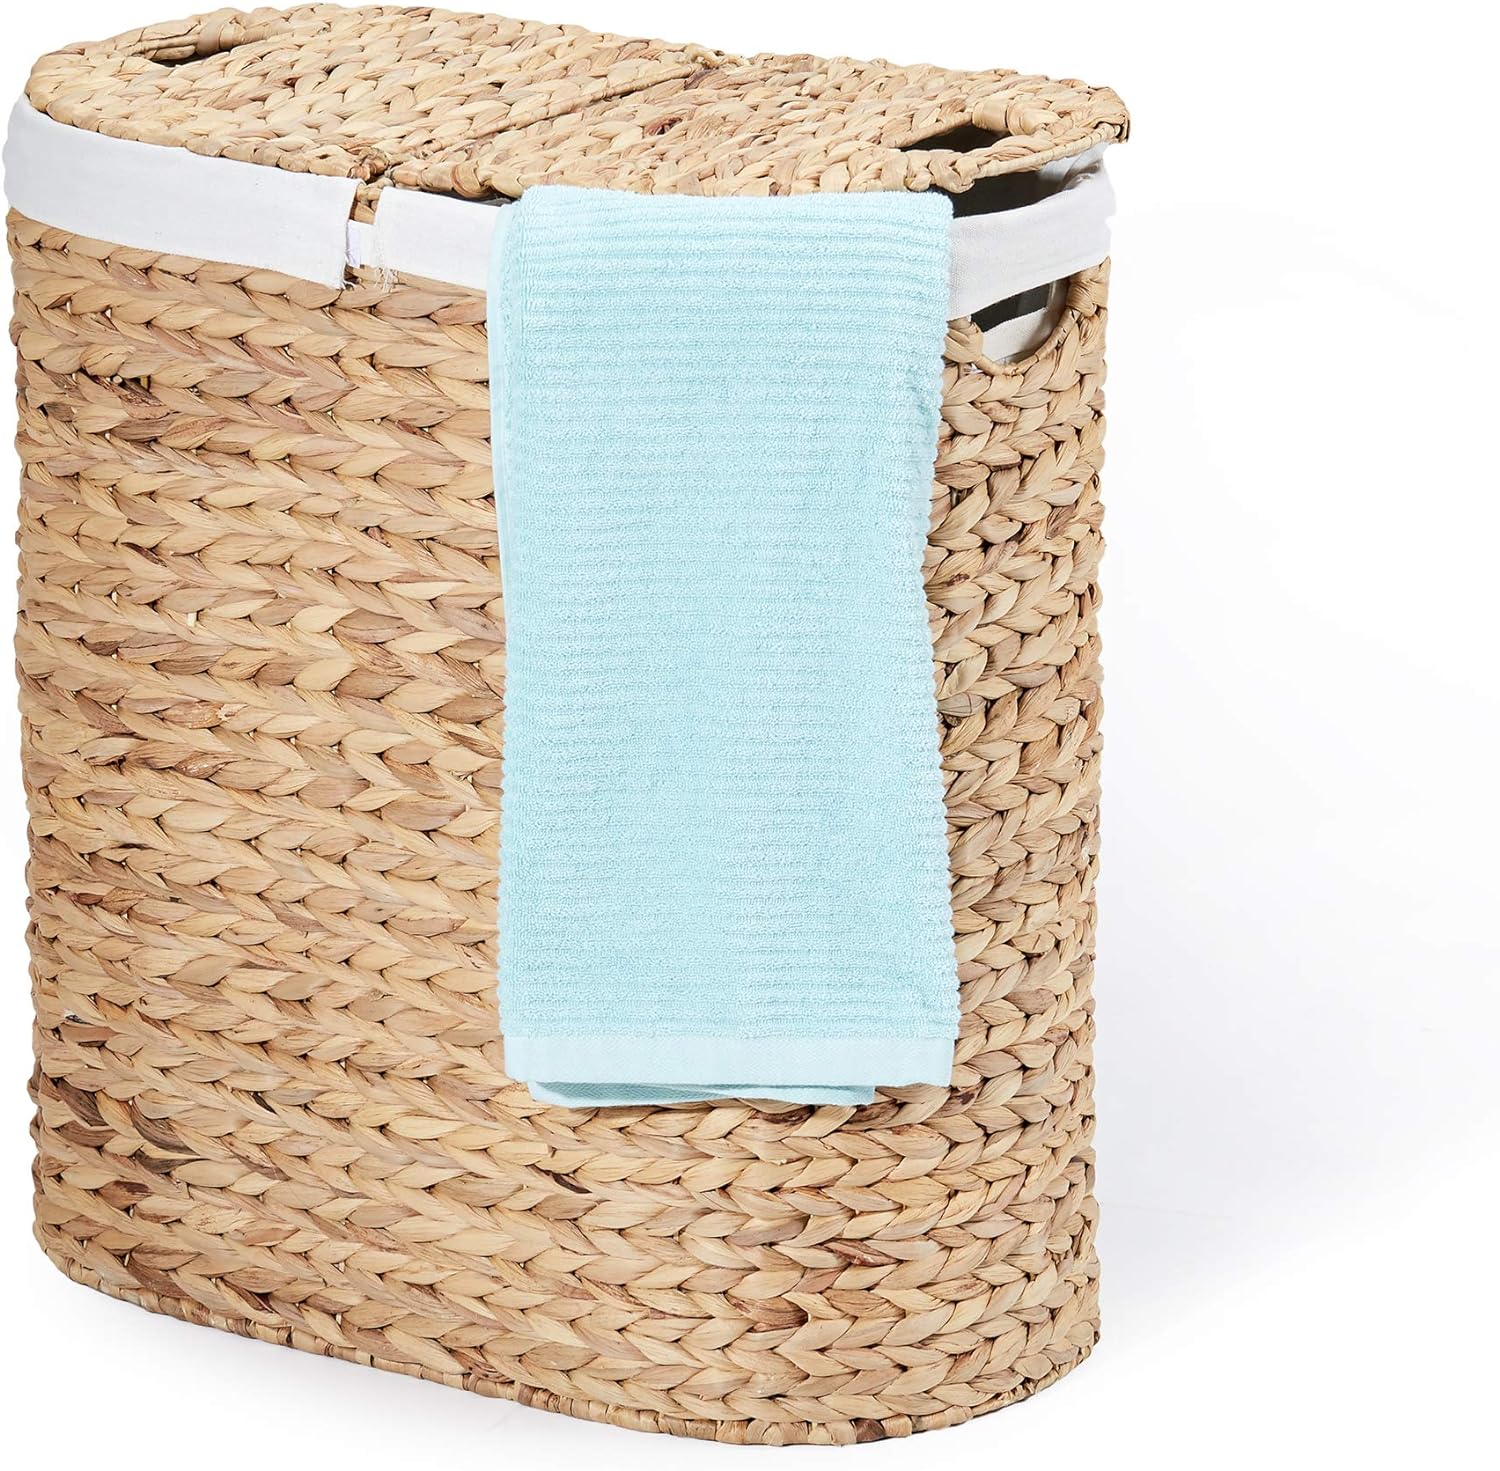 Seville Classics Premium Handwoven Portable Laundry Bin Basket with Carrying Handles, Household Storage for Clothes, Linens, Sheets, Toys, Water Hyacinth, Oval Hamper